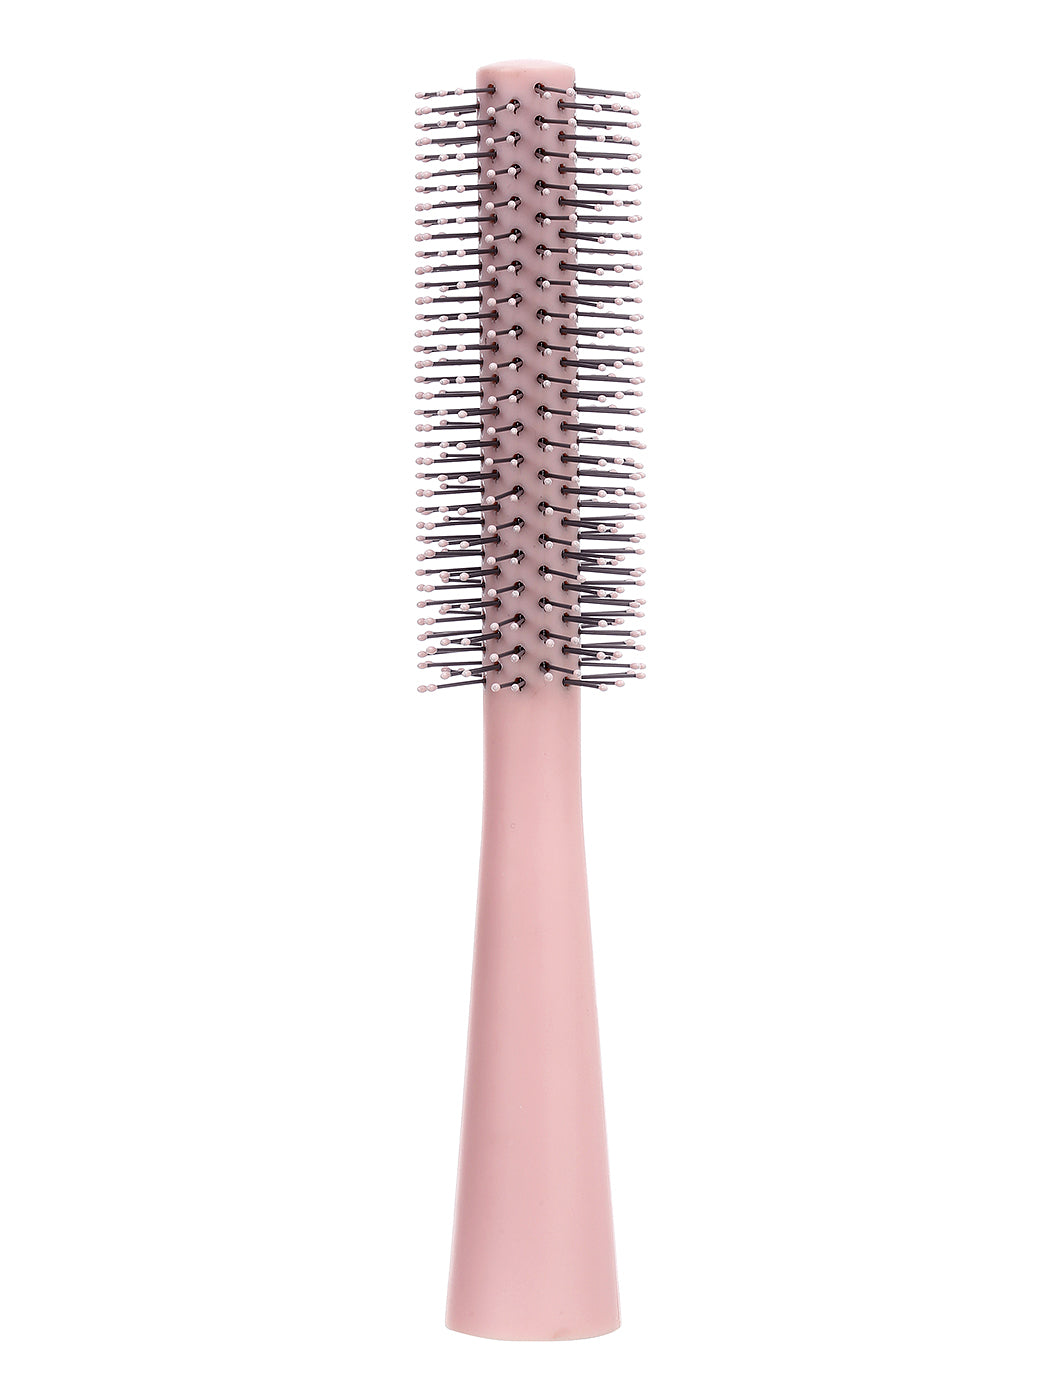 16 best hair brushes for every hair type and style | Life | Yours